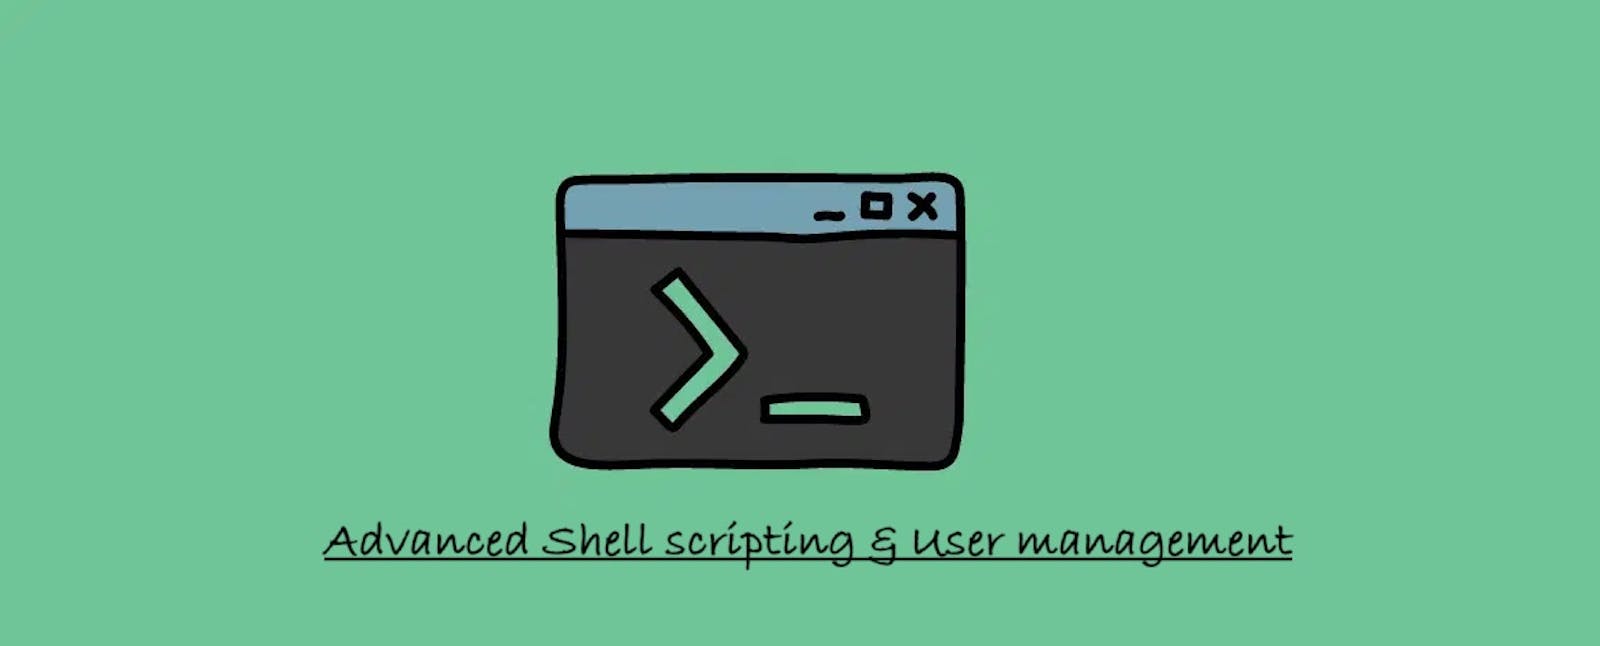 Advanced Linux Shell Scripting for DevOps Engineers with User management